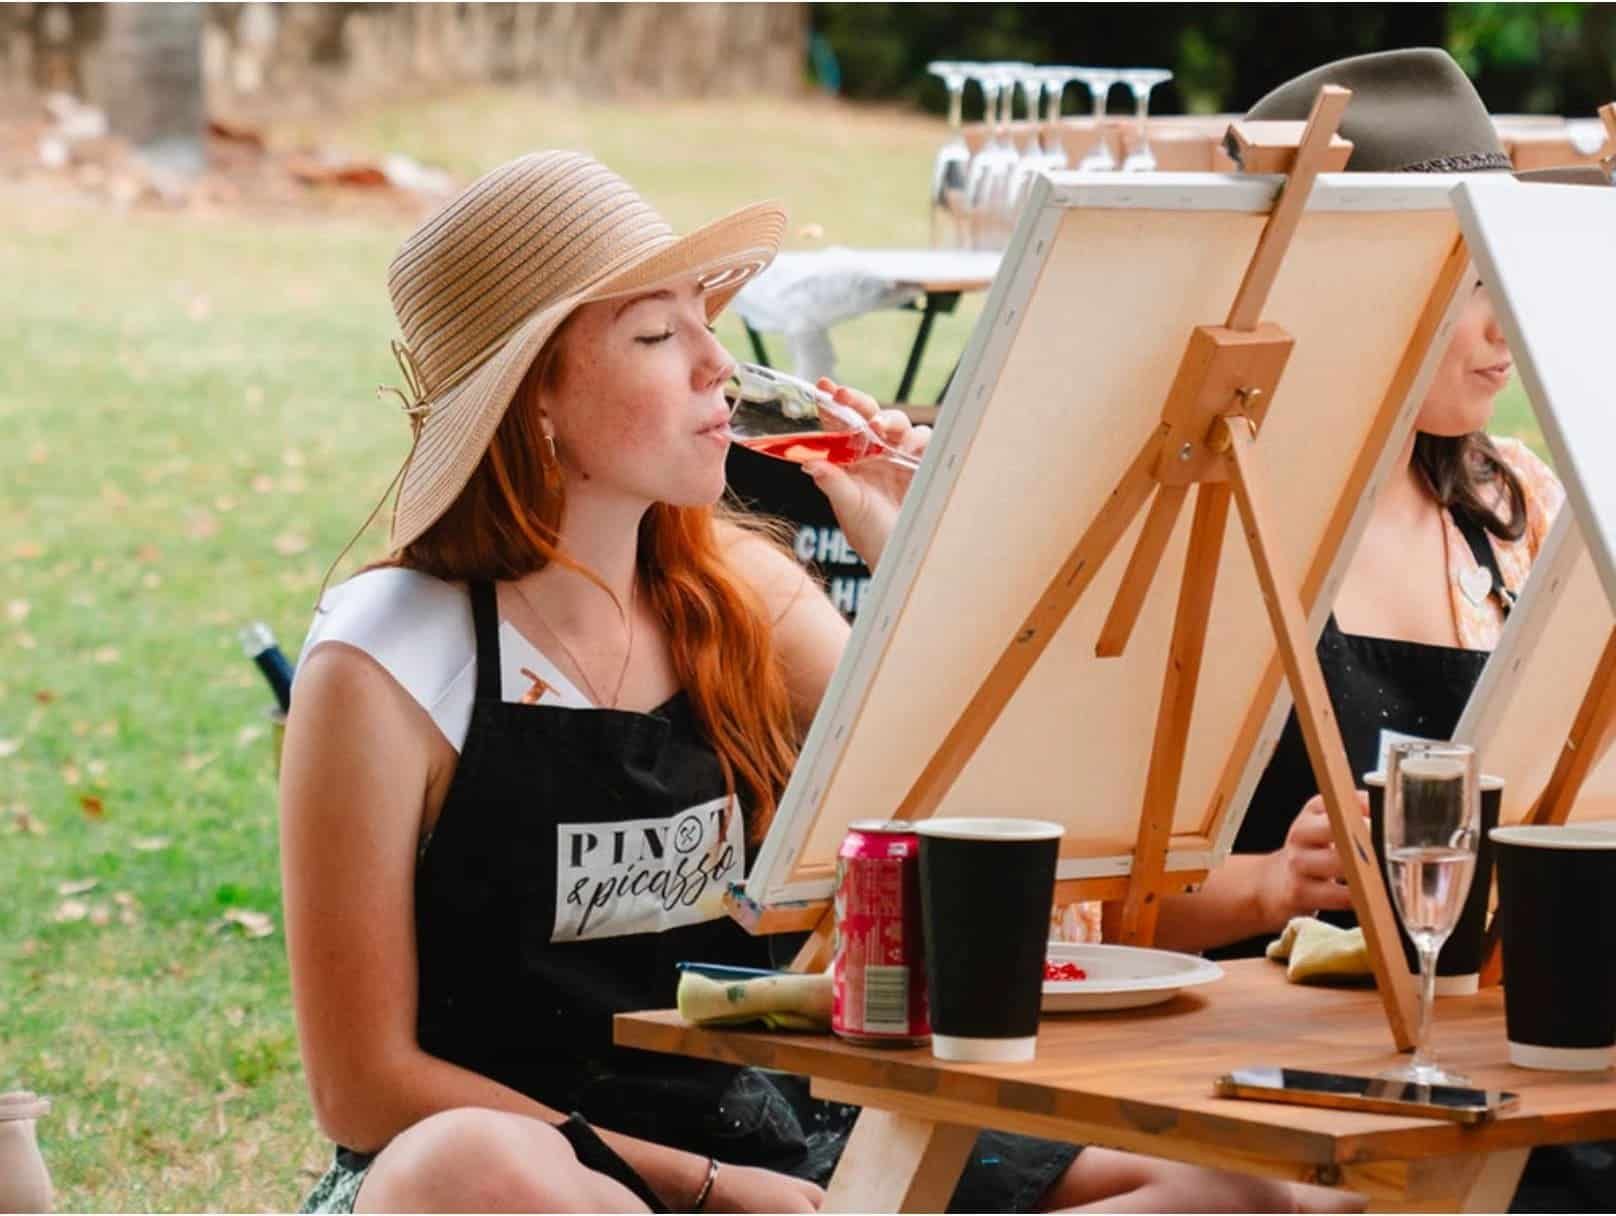 Paint & Sip Pinot & Picasso Picnic